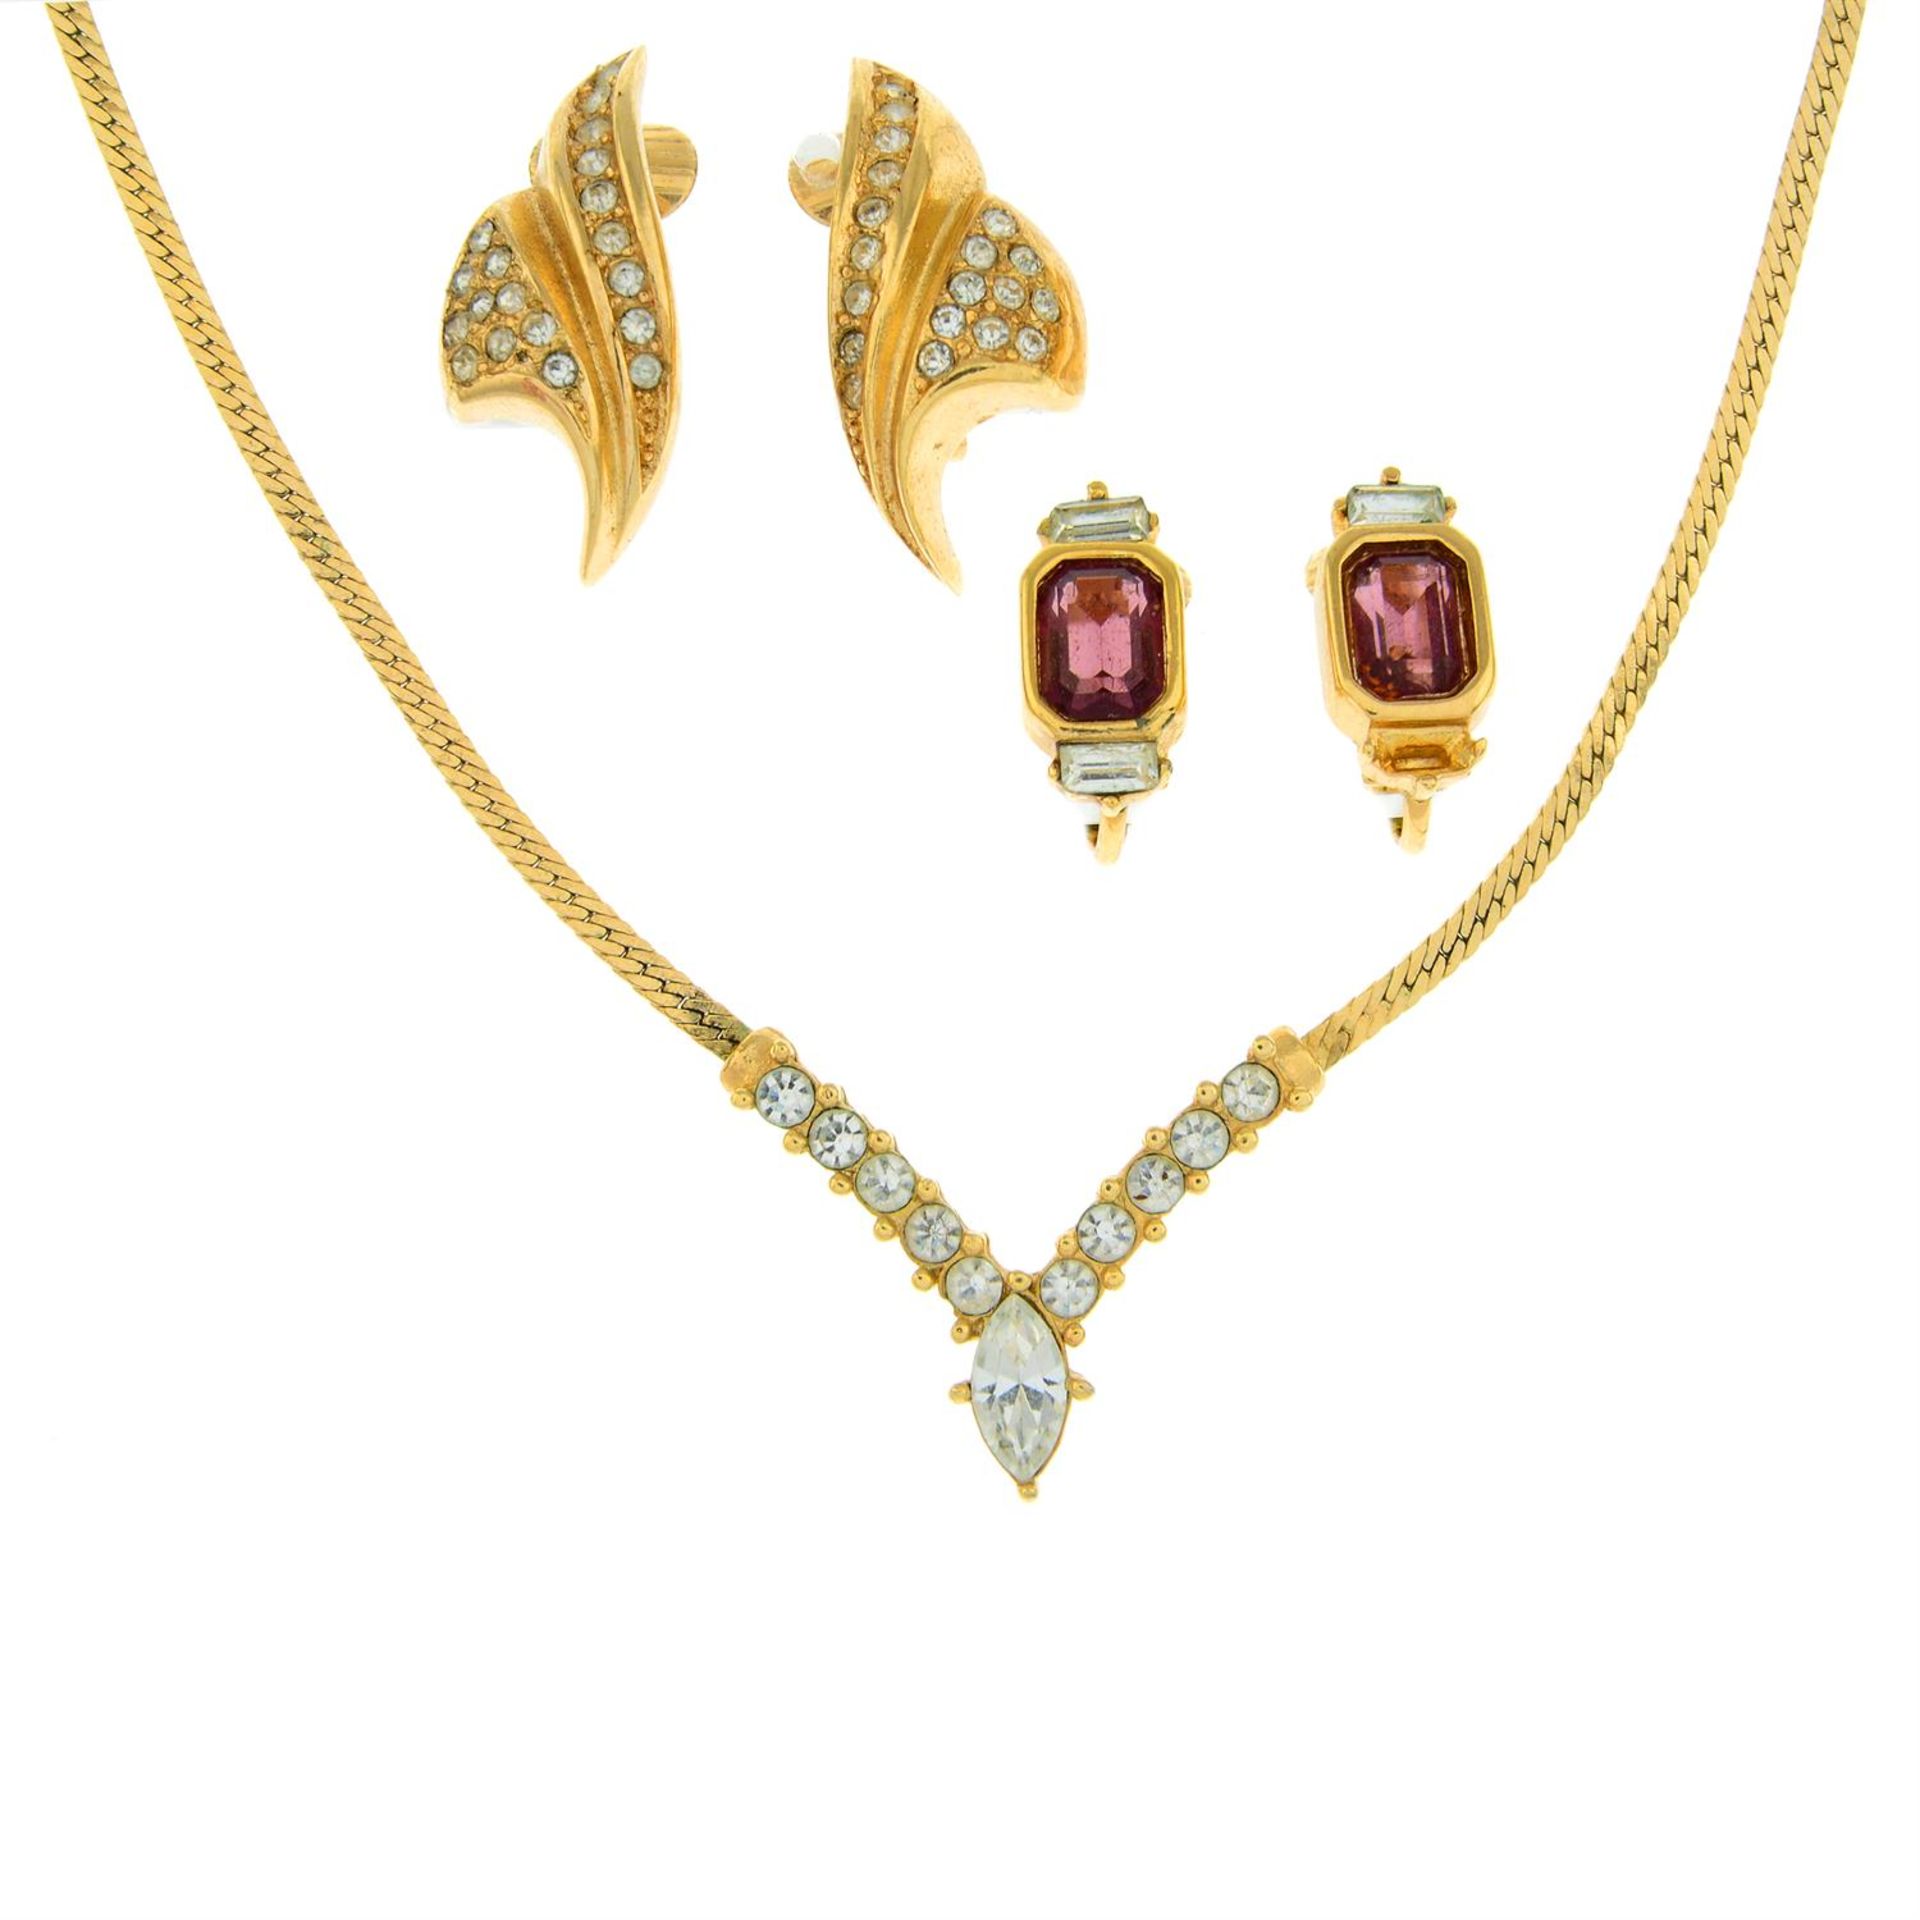 CHRISTIAN DIOR - three pieces of jewellery.